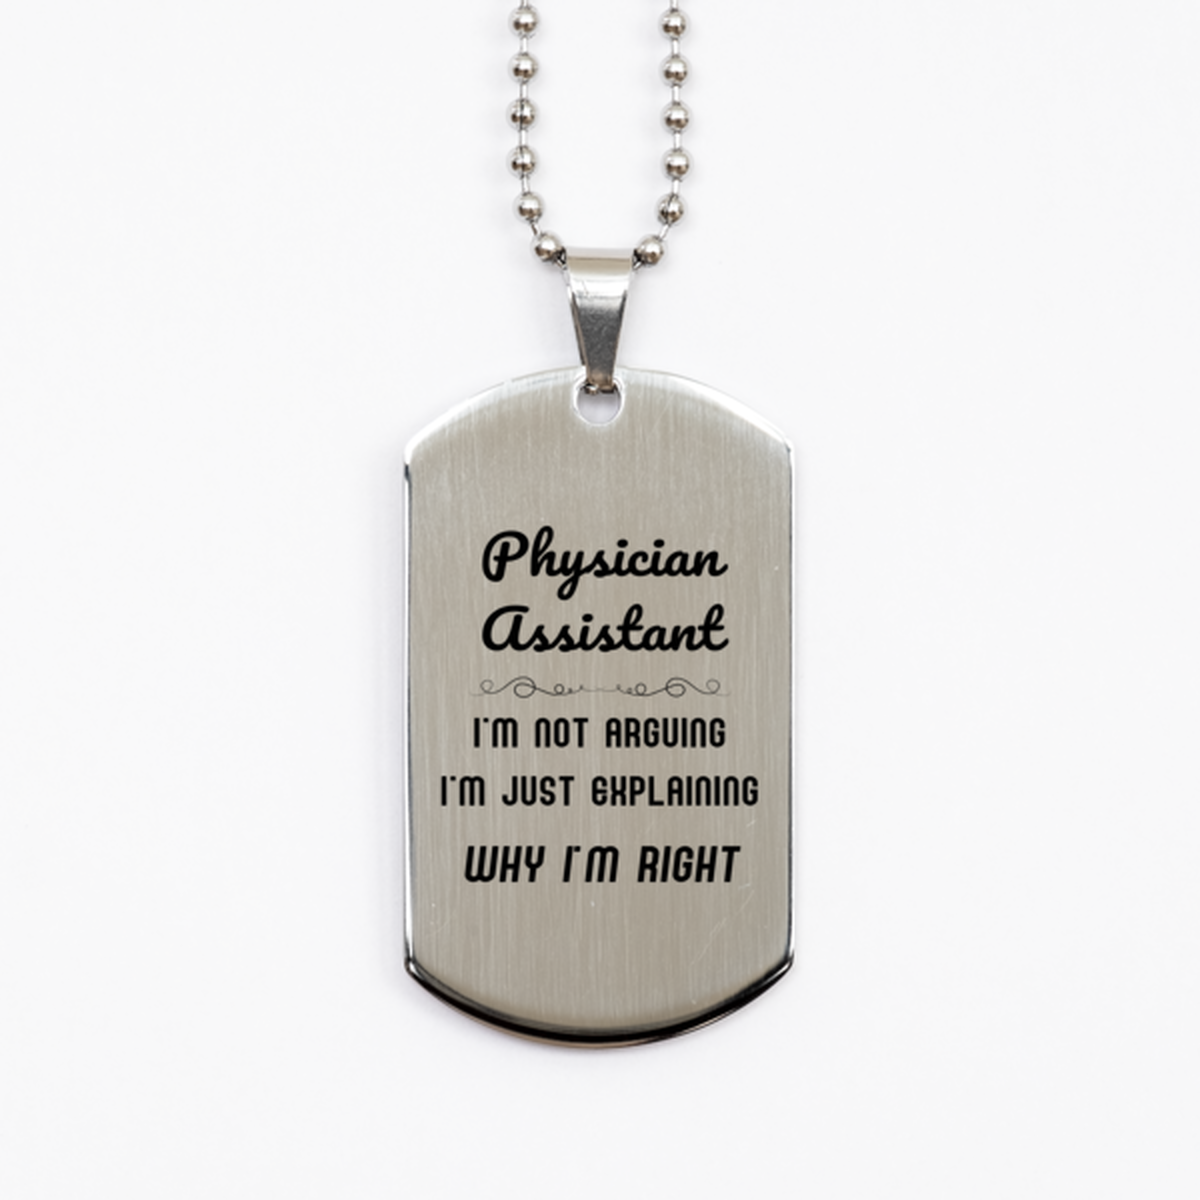 Physician Assistant I'm not Arguing. I'm Just Explaining Why I'm RIGHT Silver Dog Tag, Funny Saying Quote Physician Assistant Gifts For Physician Assistant Graduation Birthday Christmas Gifts for Men Women Coworker